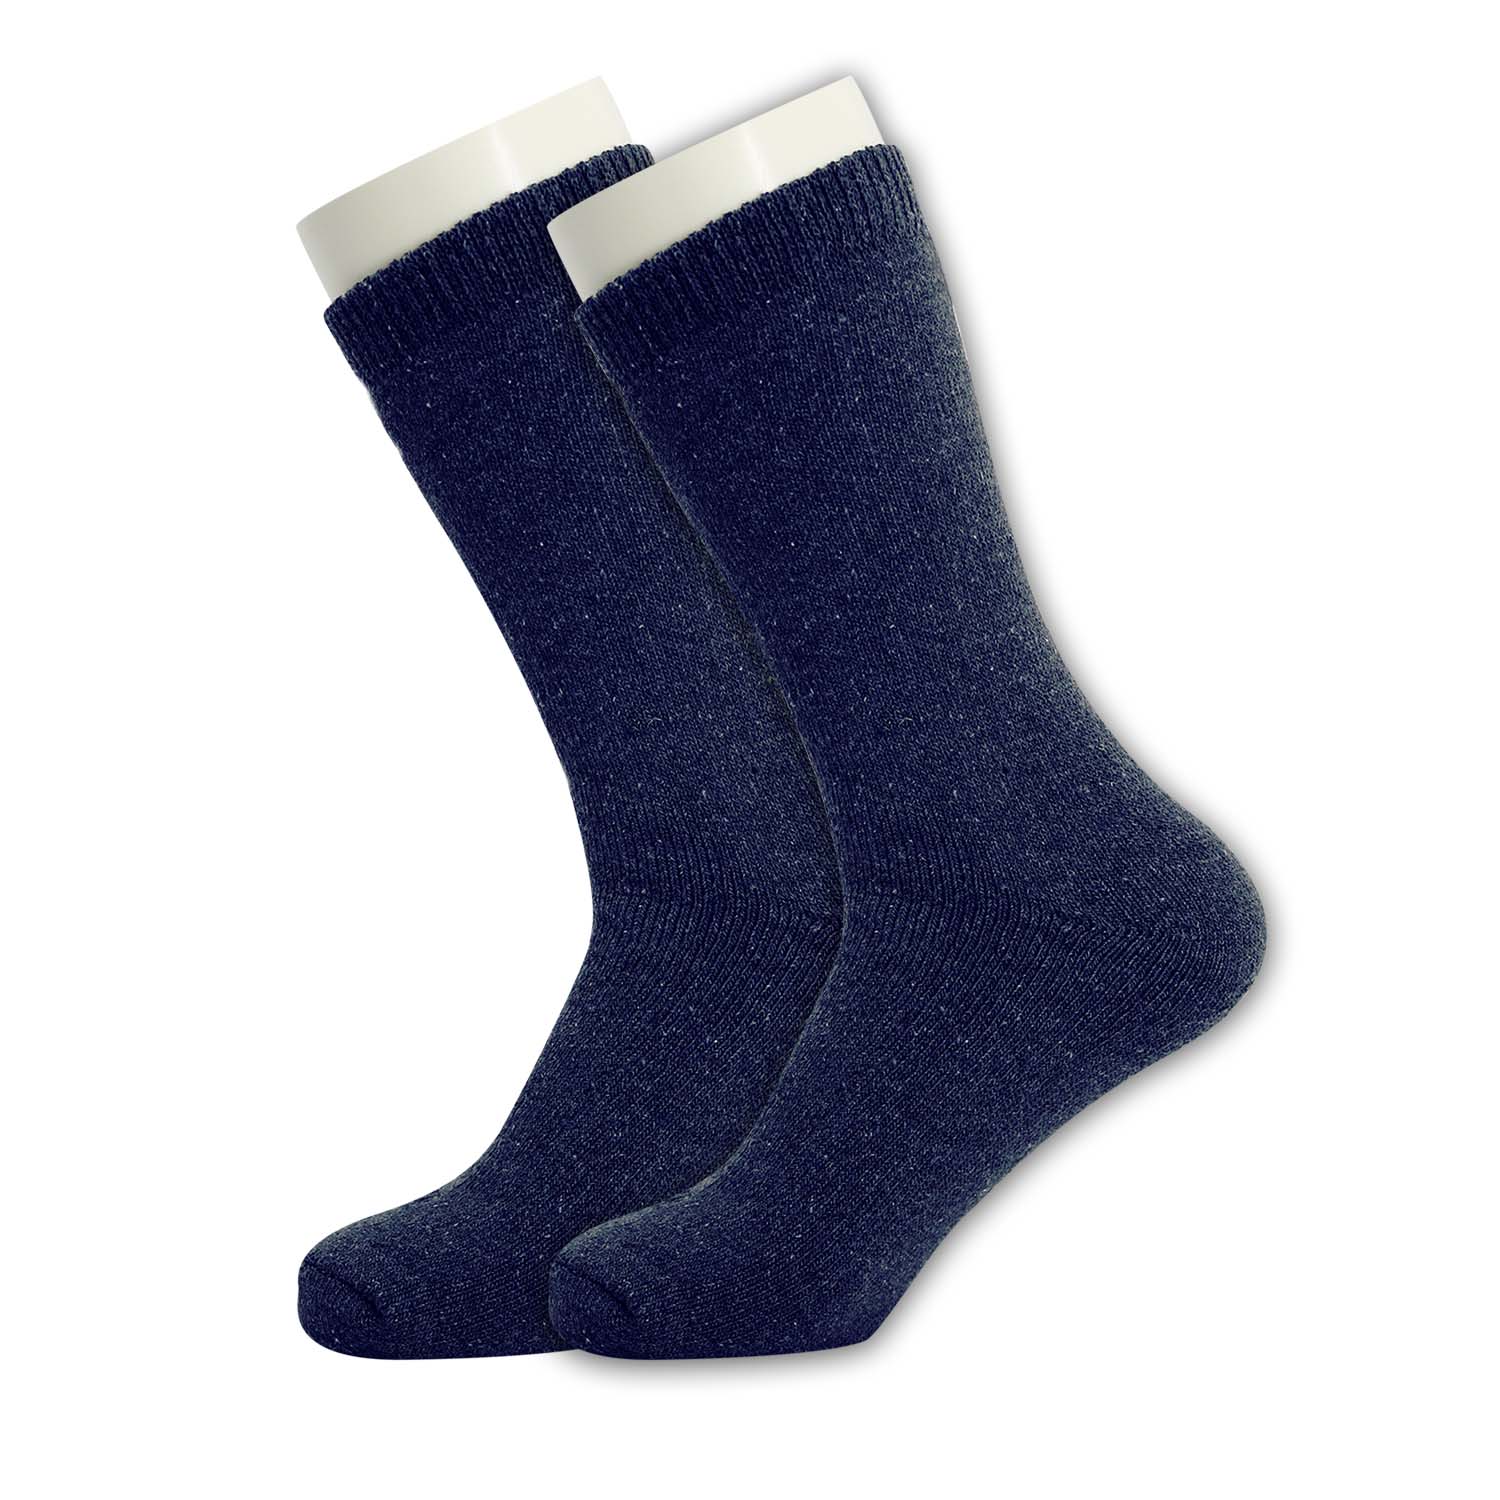 Unisex Crew Wholesale Thermal Sock, Size 9-13 in 3 Assorted Colors - Bulk Case of 96 Pairs